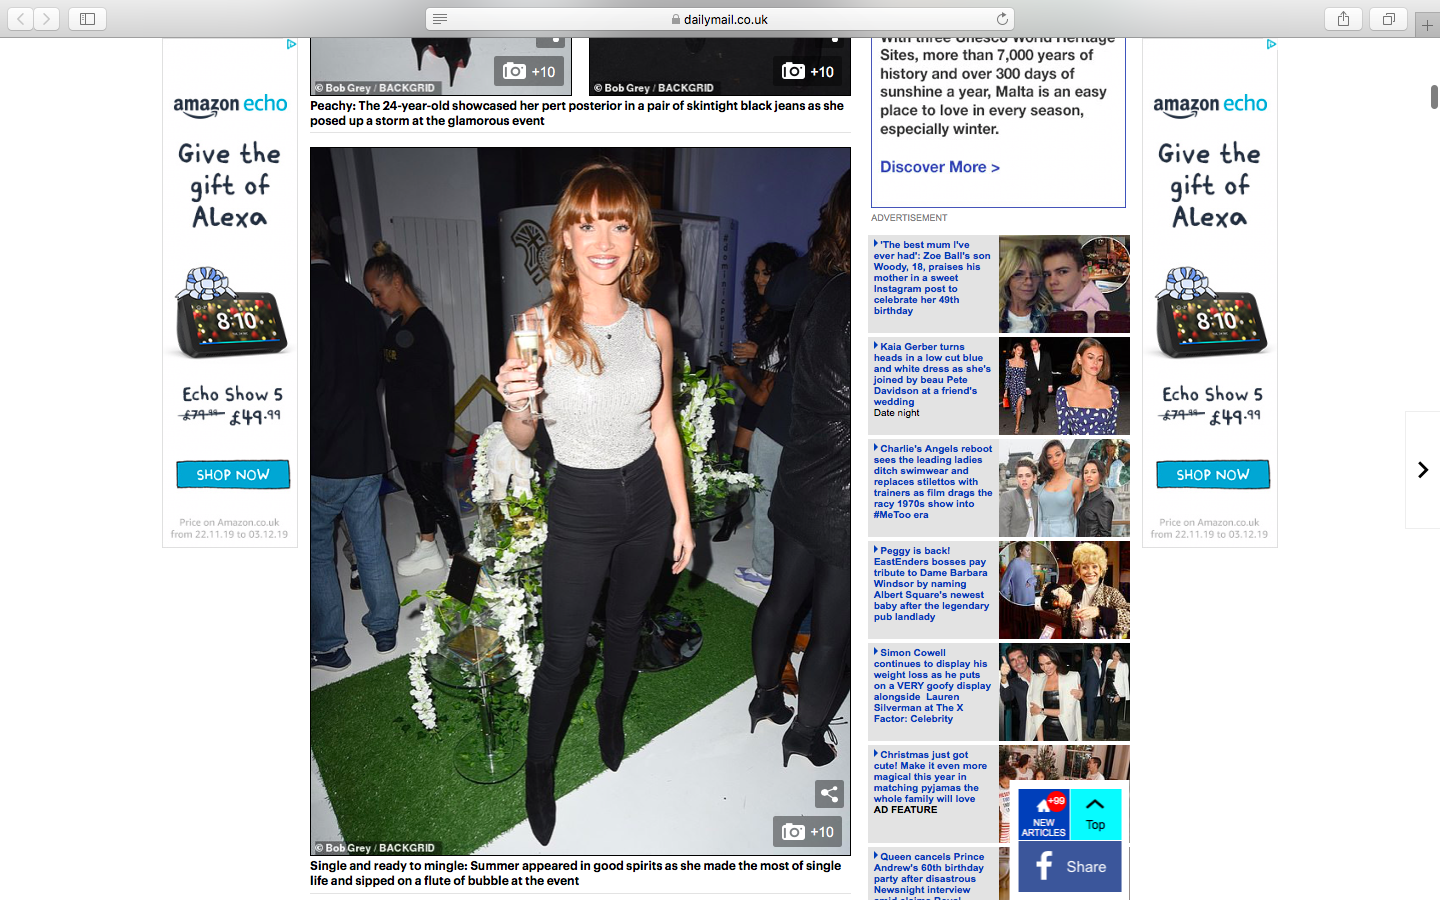 Summer Monteys Fullam at our Dominic Paul Cosmetics Launch Party | Daily Mail